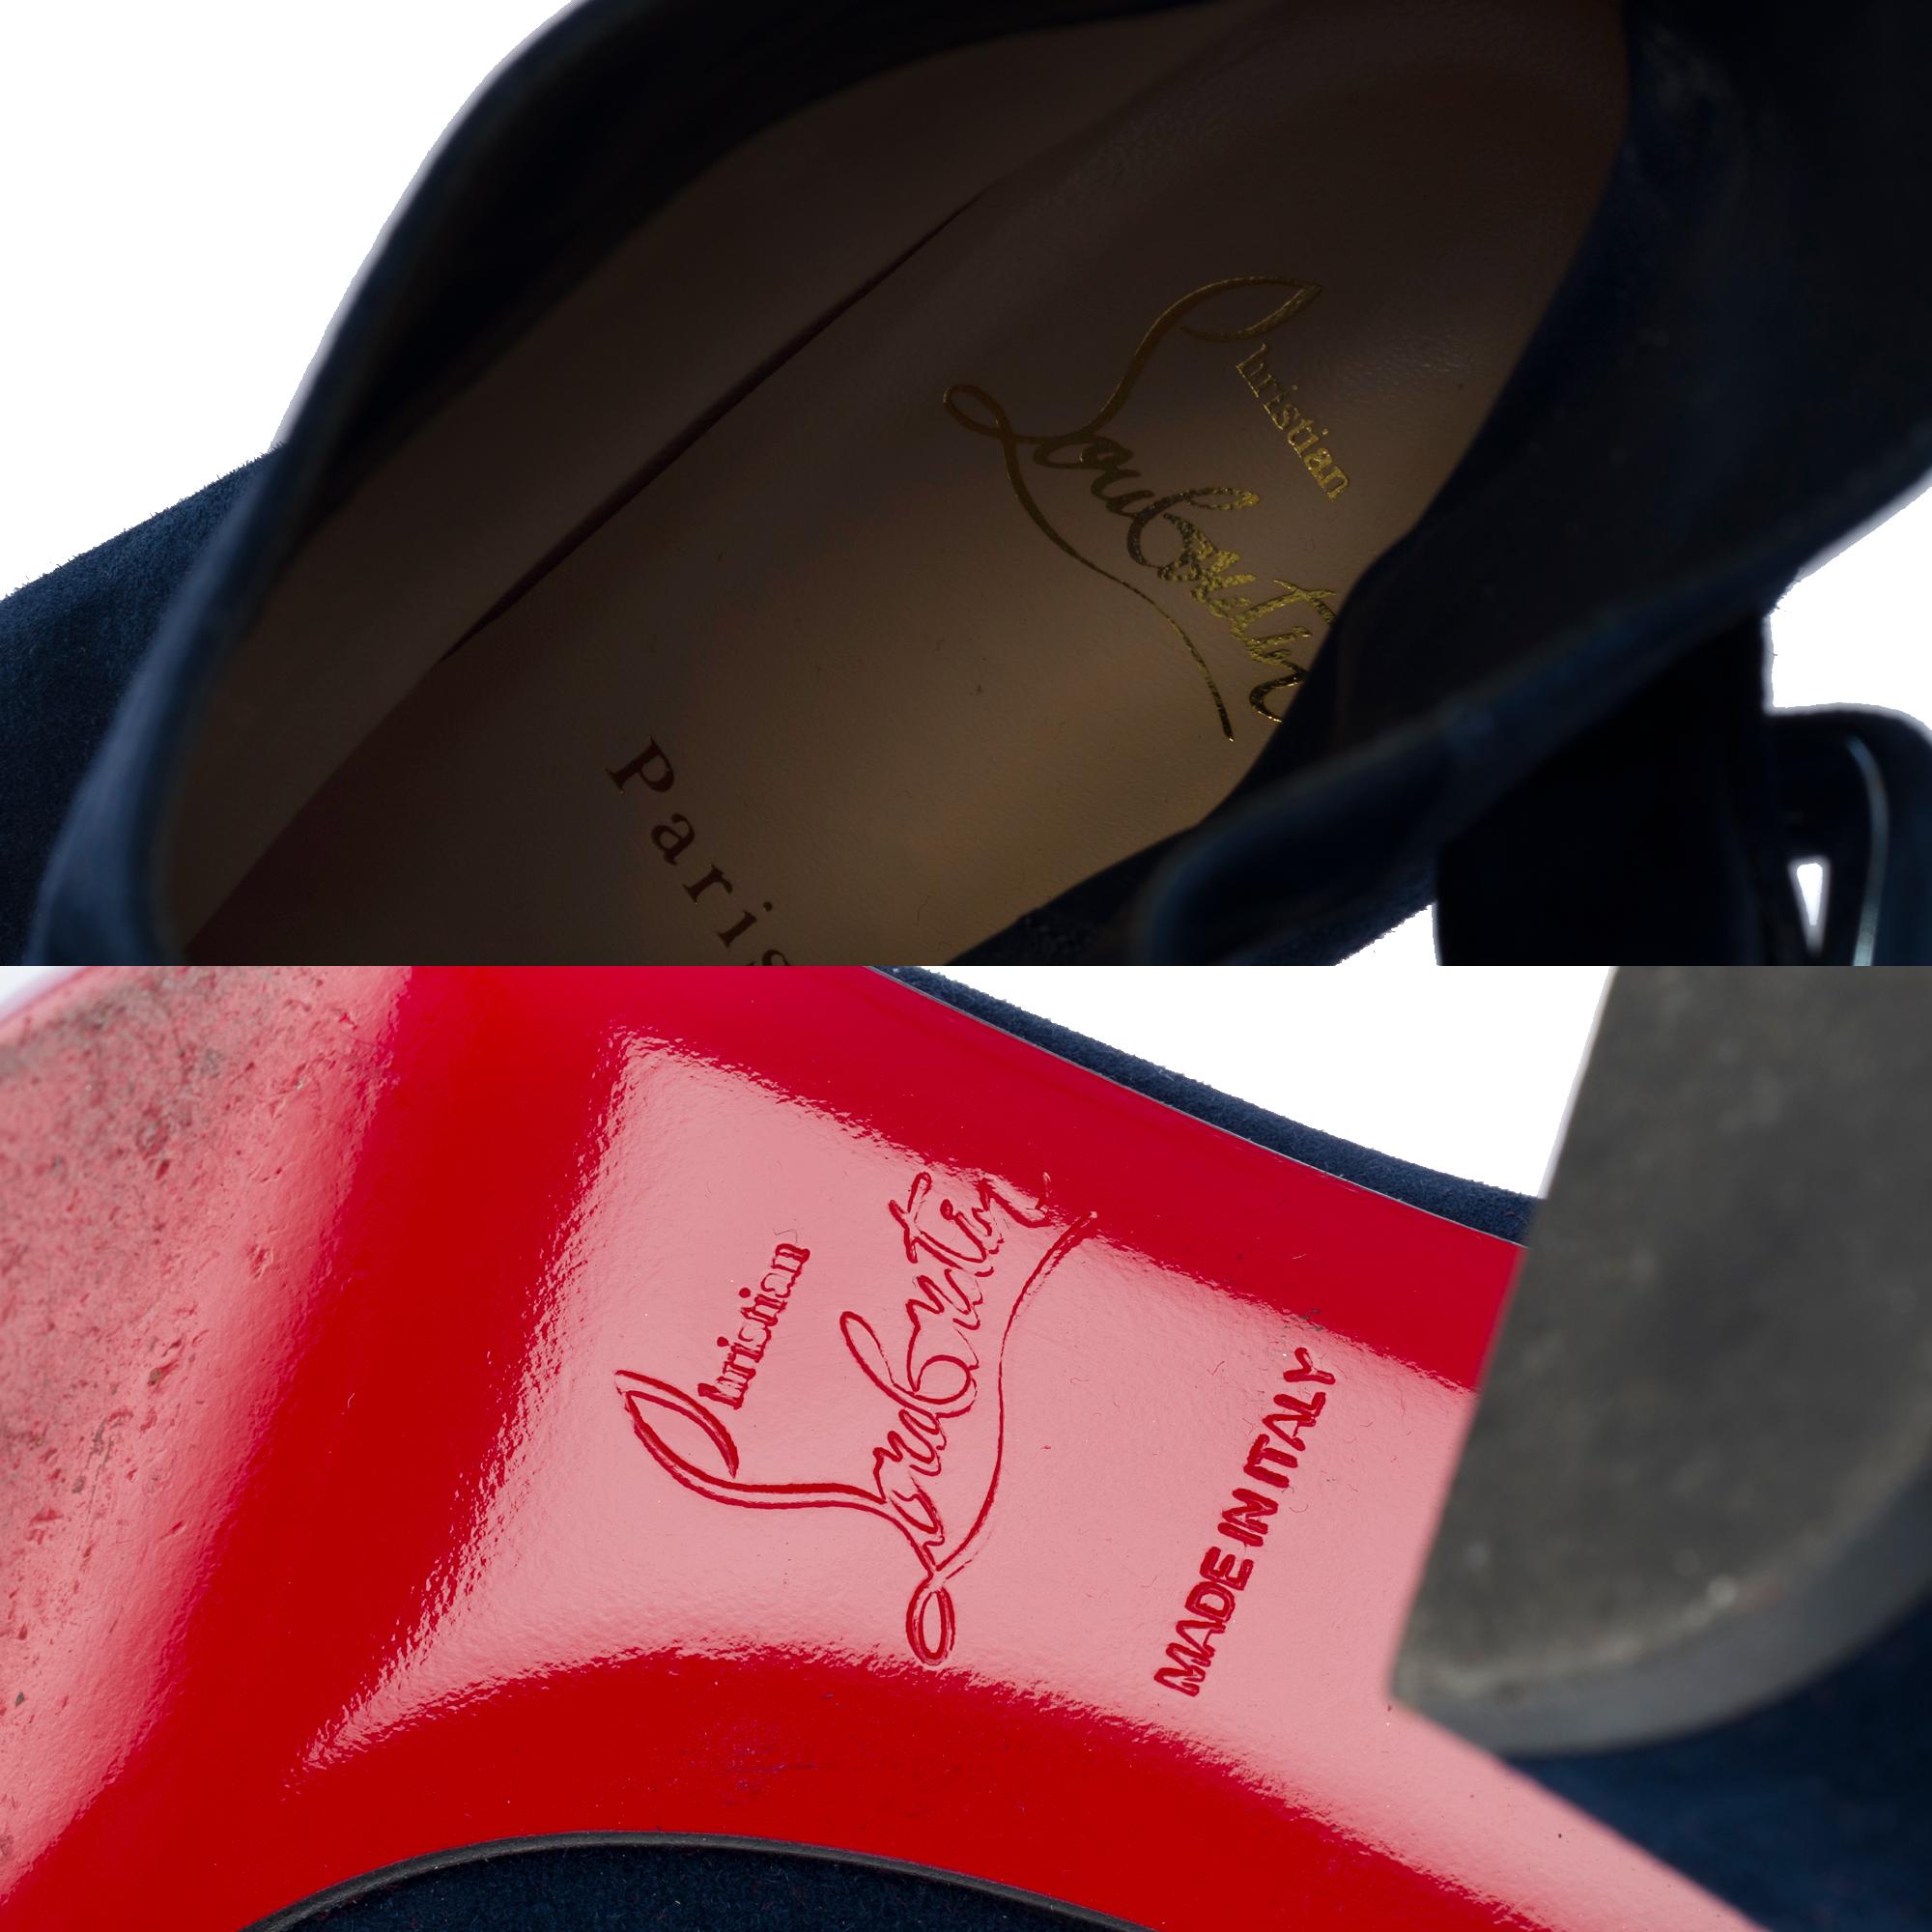 Christian Louboutin ankleboot in blue suede, size 37 For Sale 3